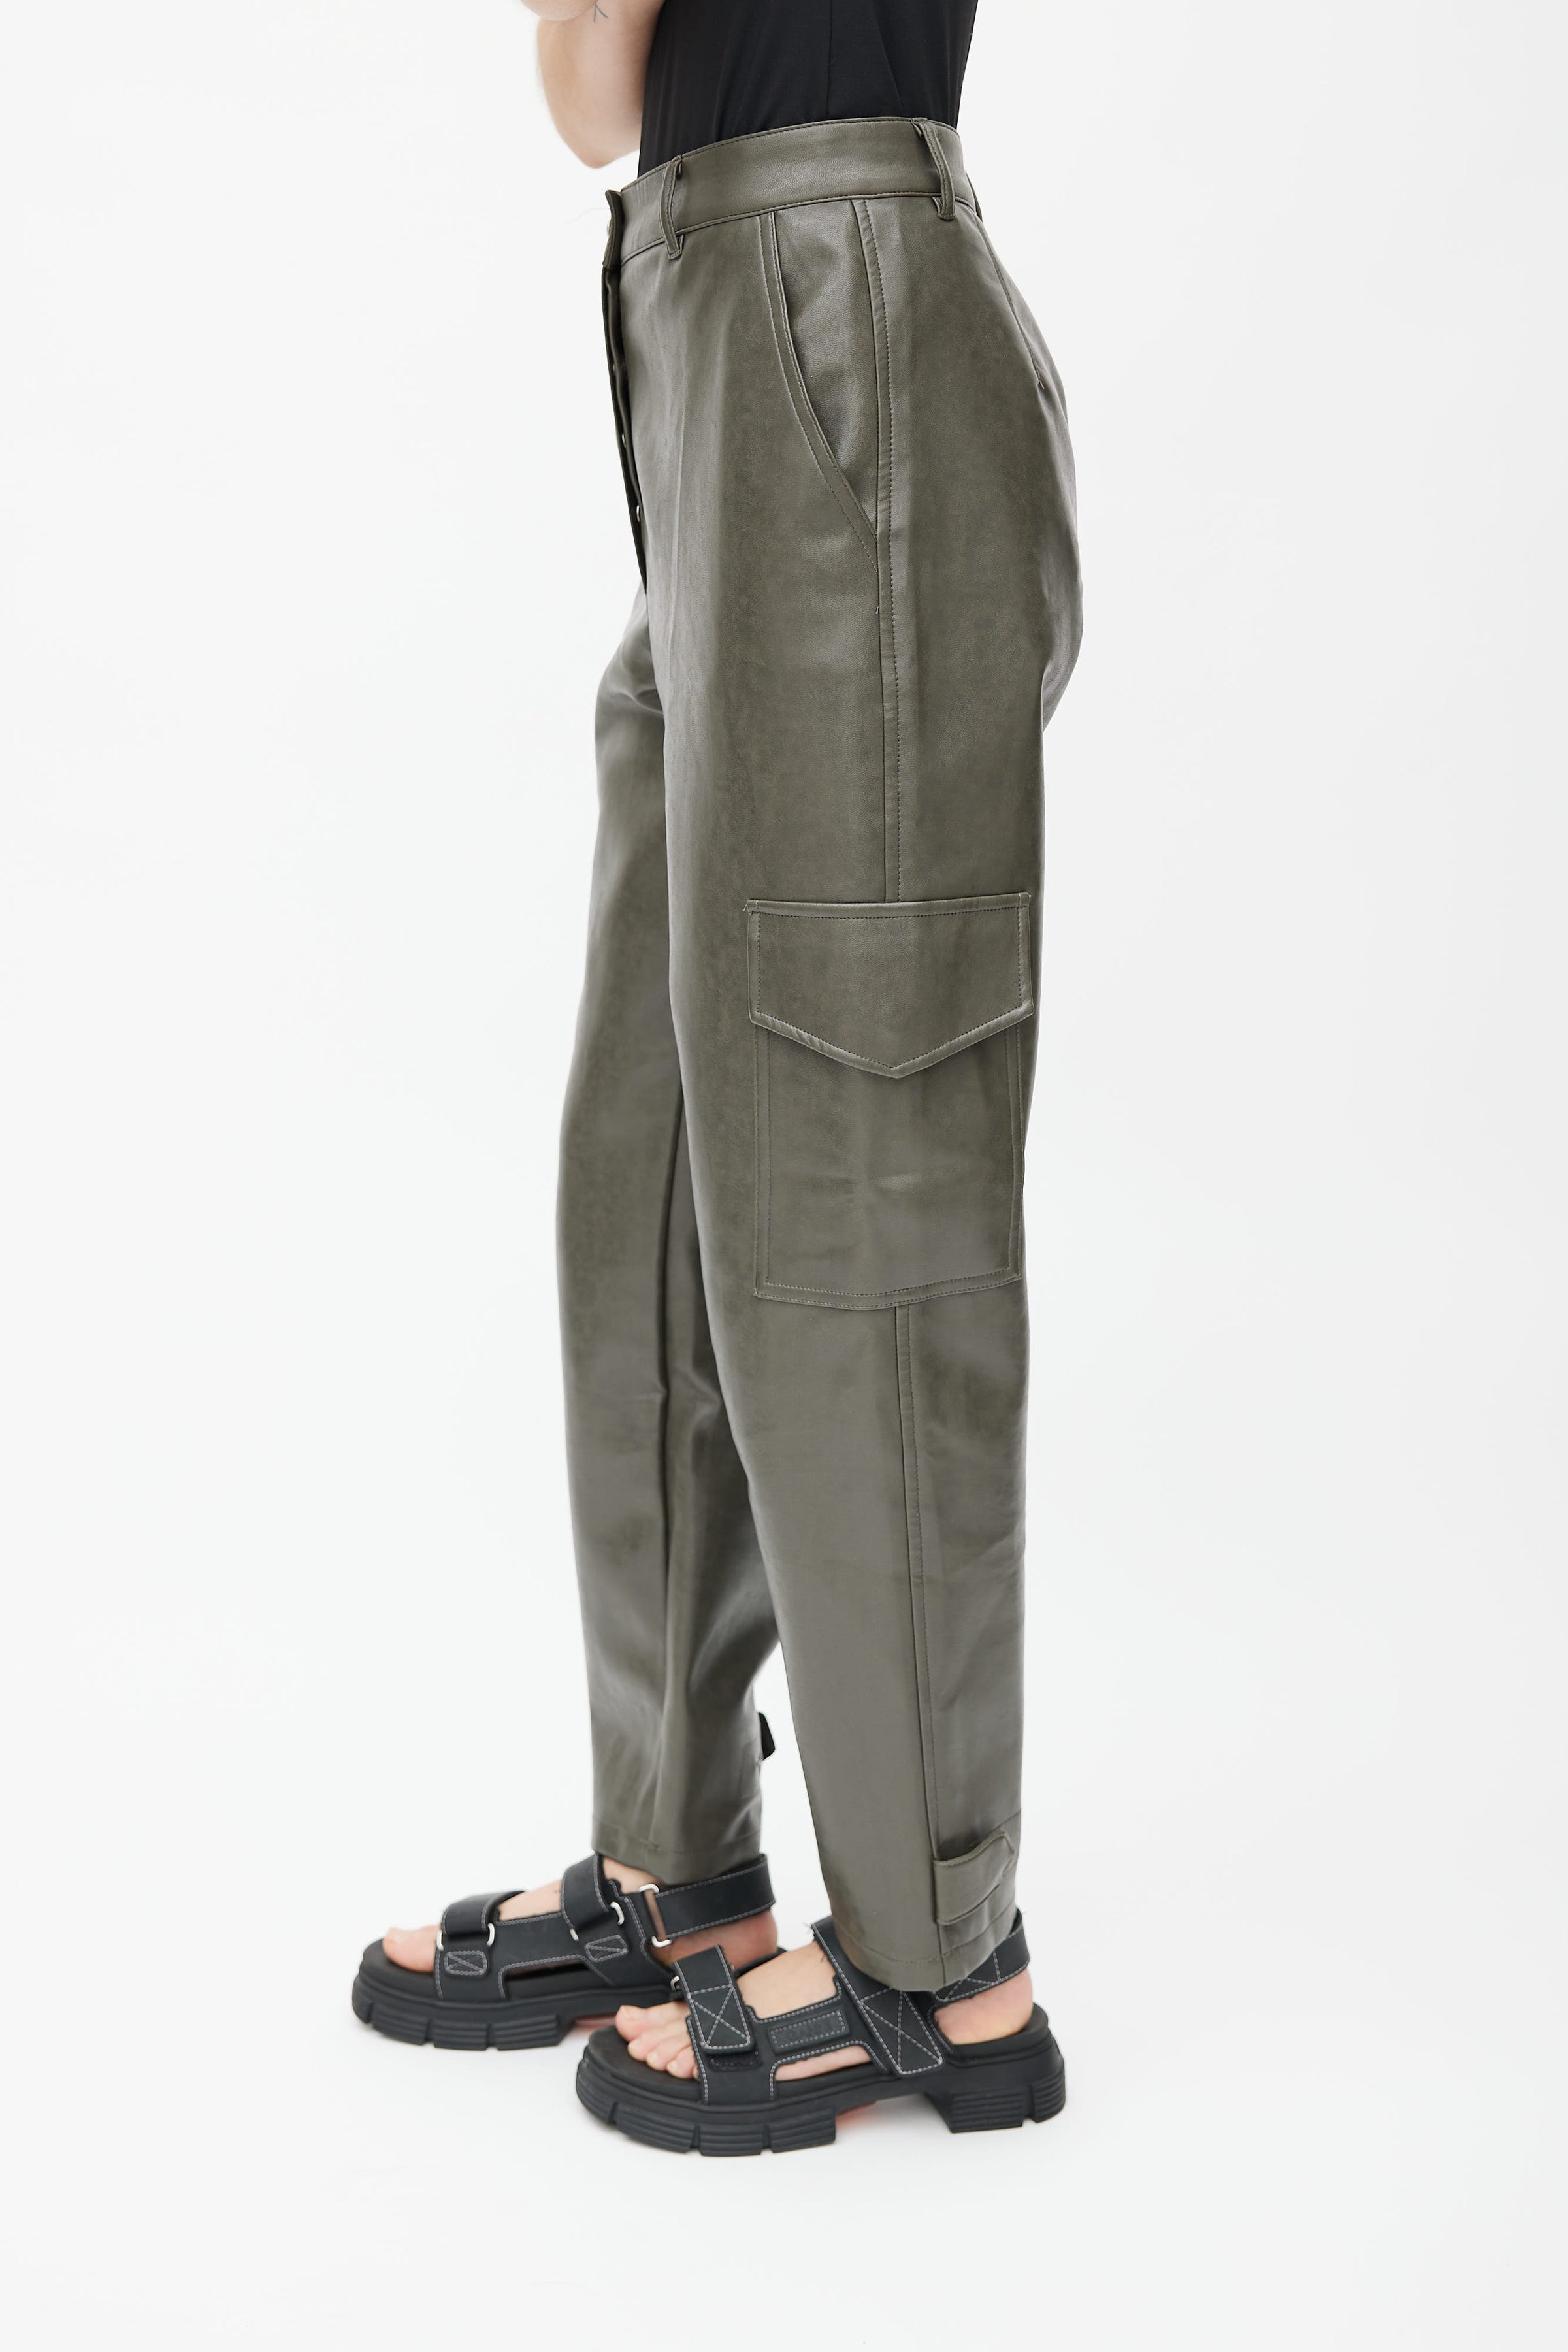 Utility Cargo Pants for the Modern Lee Male | Lee®